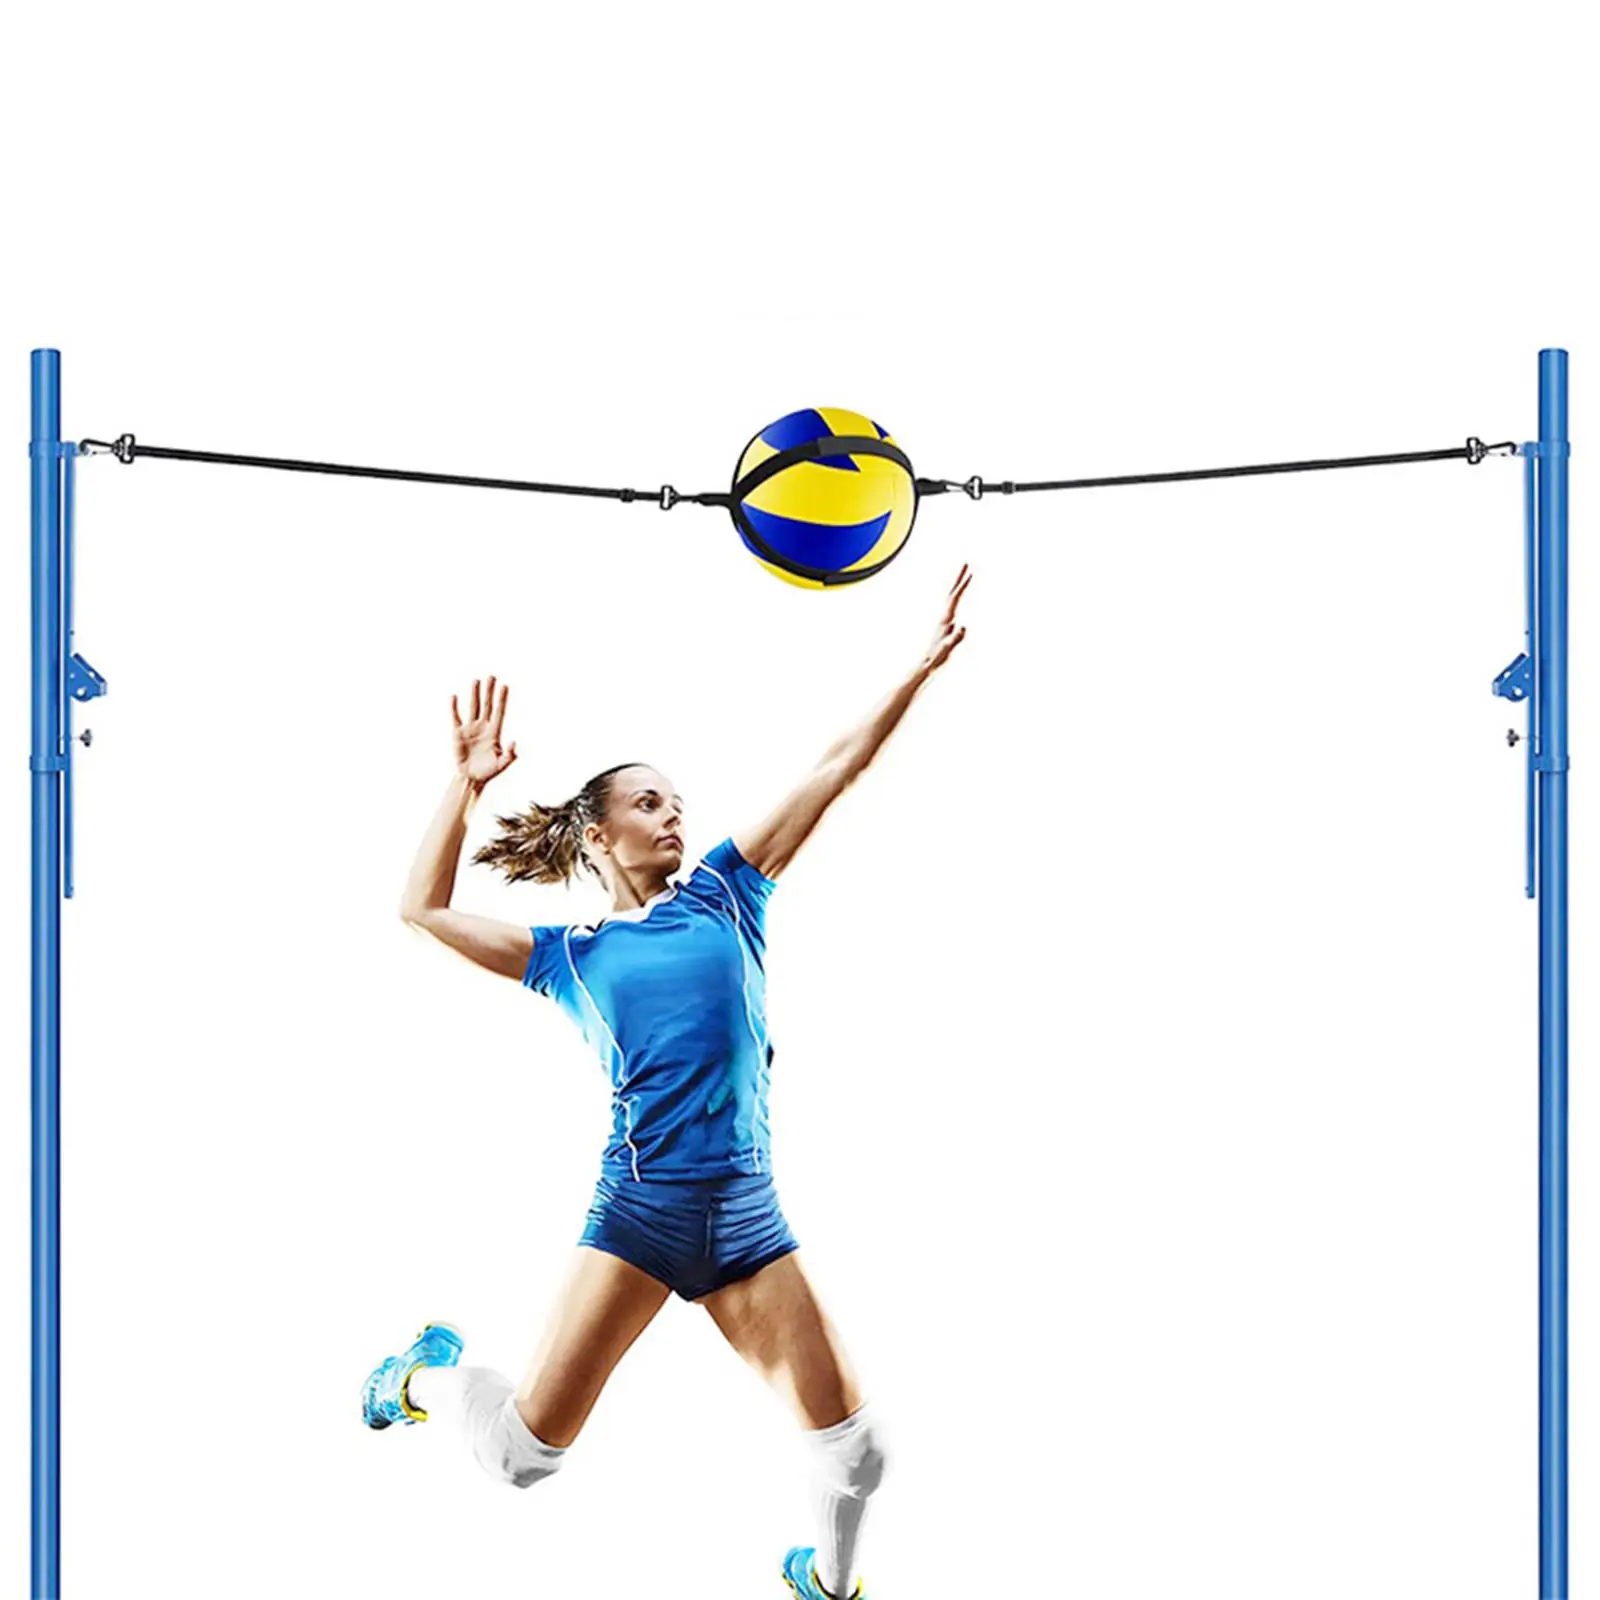 Volleyball Training Equipment Aid Solo Practice Gifts for Jumping Beginners